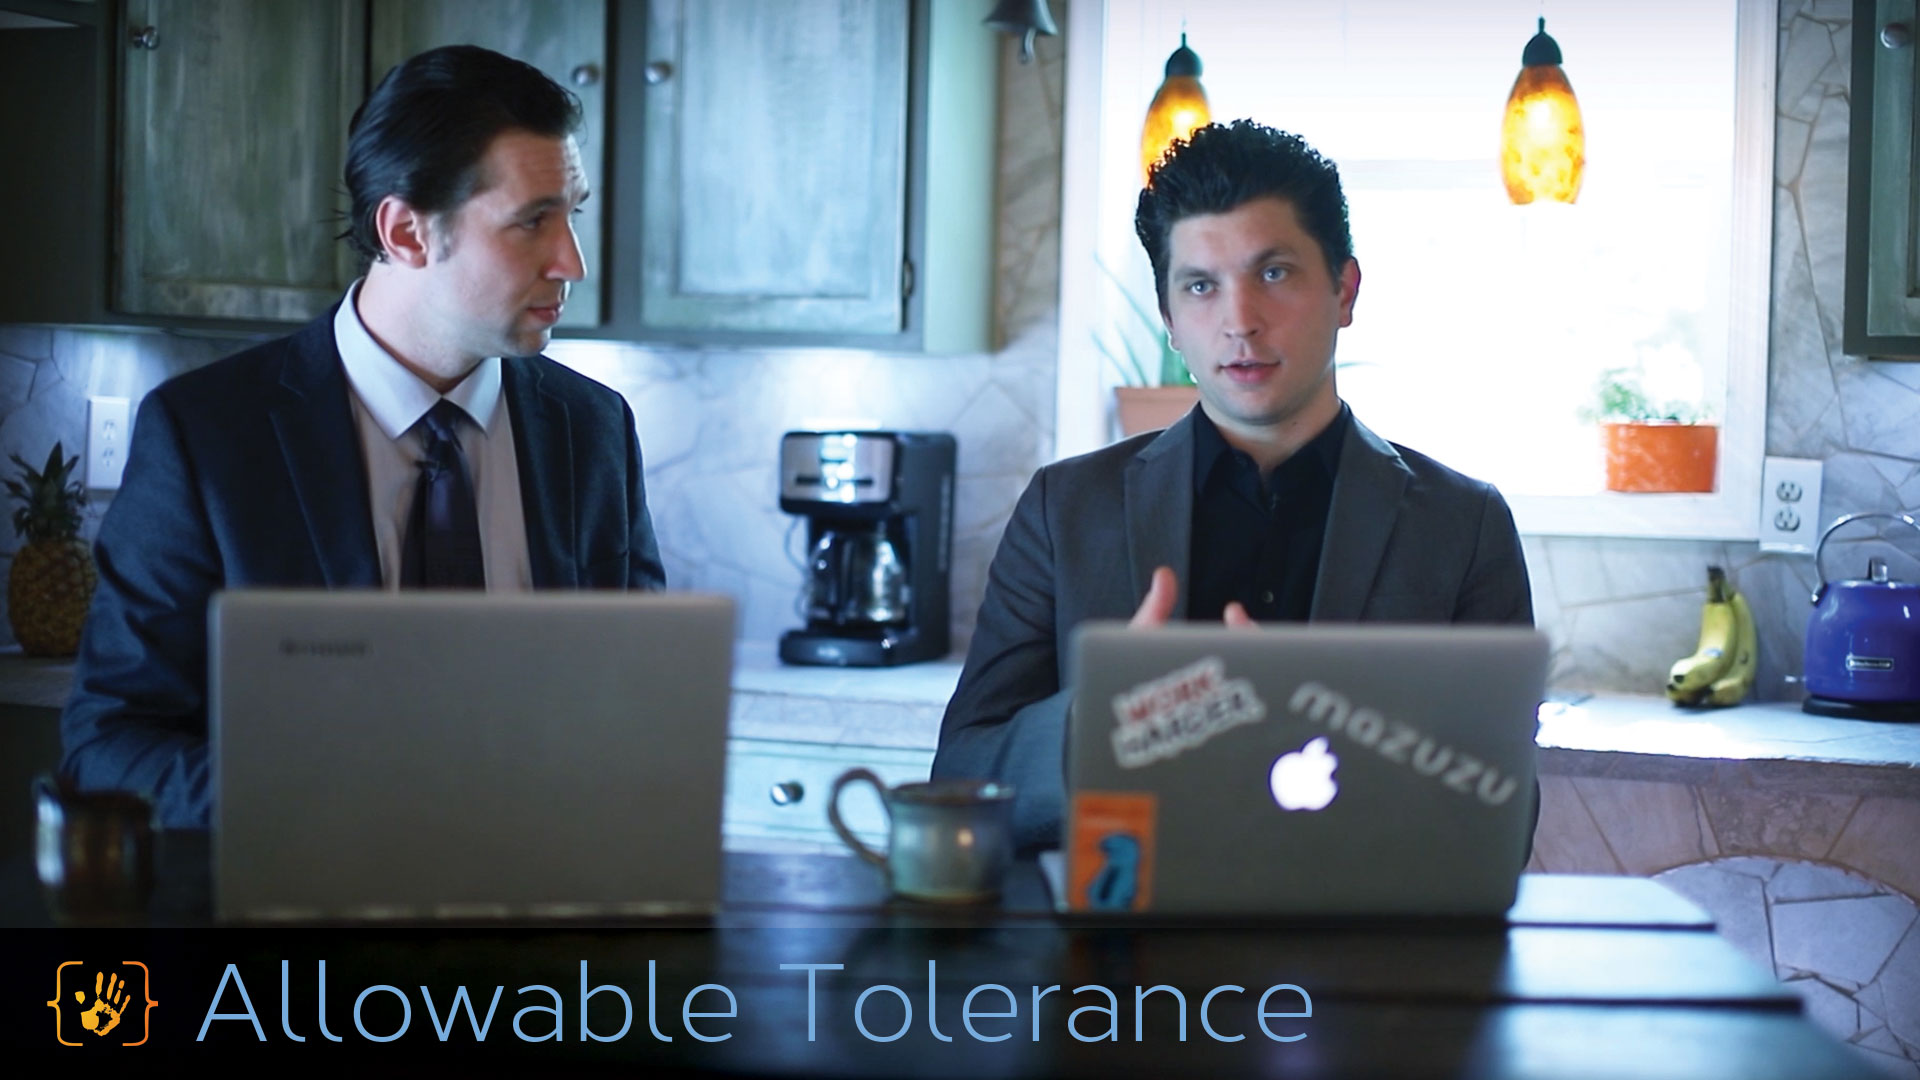 Watch Allowable Tolerance: The tolerance required for any given task. In other words, how perfect you need to be, and how much time and cost can be sacrificed in pursuit of that level of perfection.  on Youtube